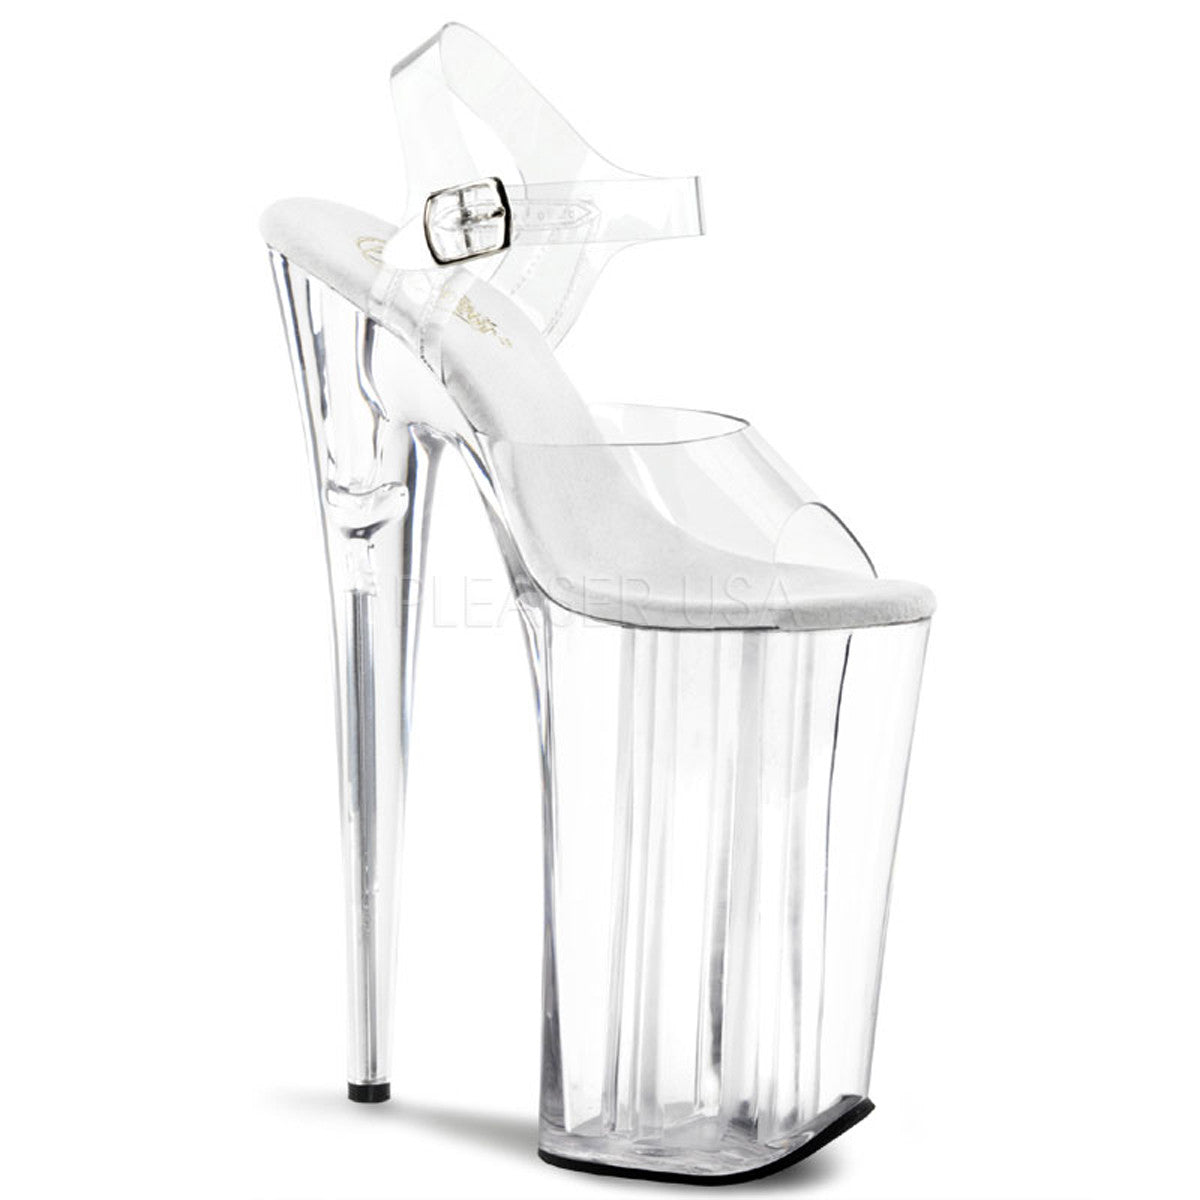 PLEASER BEYOND-008 Clear Extreme 10 Inch High Heels - Shoecup.com - 1